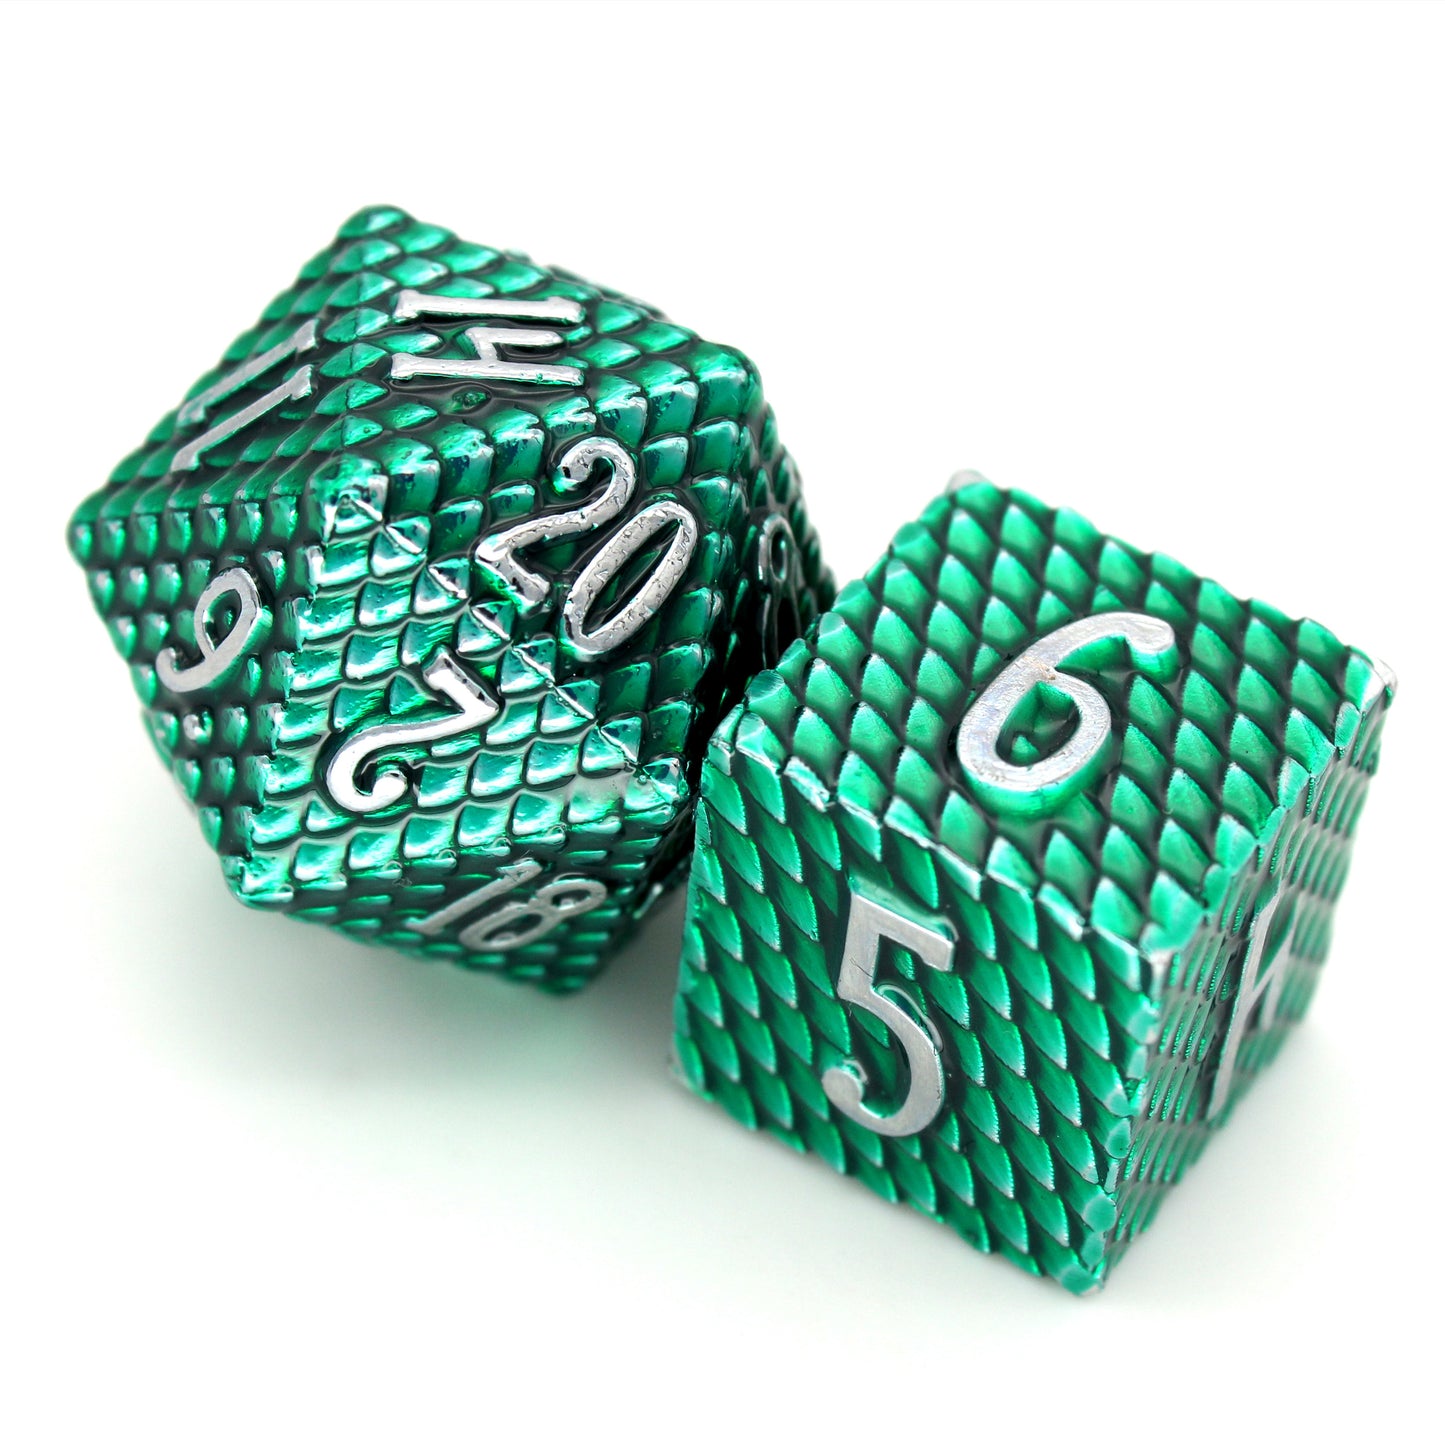 Wyvern is a 7-piece emerald green scaled metal set with cool silver numbering.